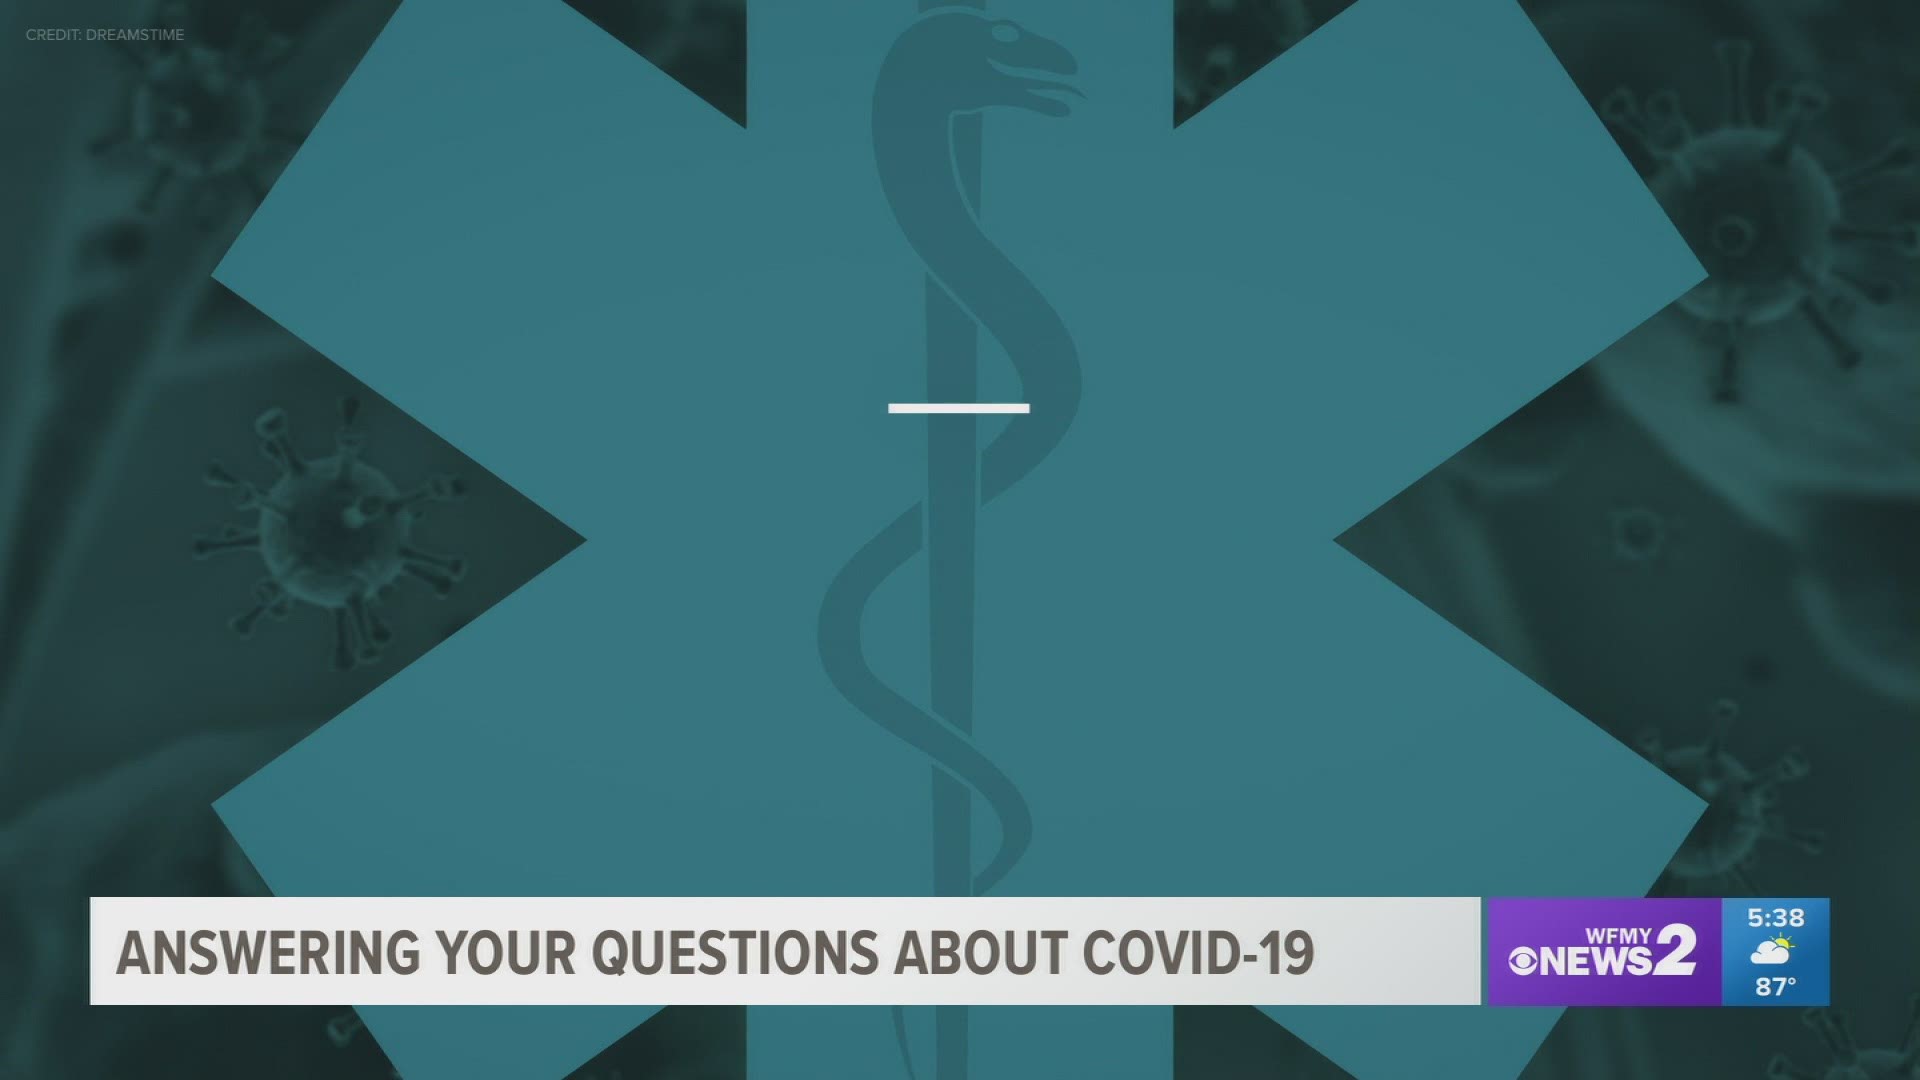 Family Medicine Physician Doctor Zoe Stallings with Cone Health Medical Group takes the time to answer your coronavirus questions.